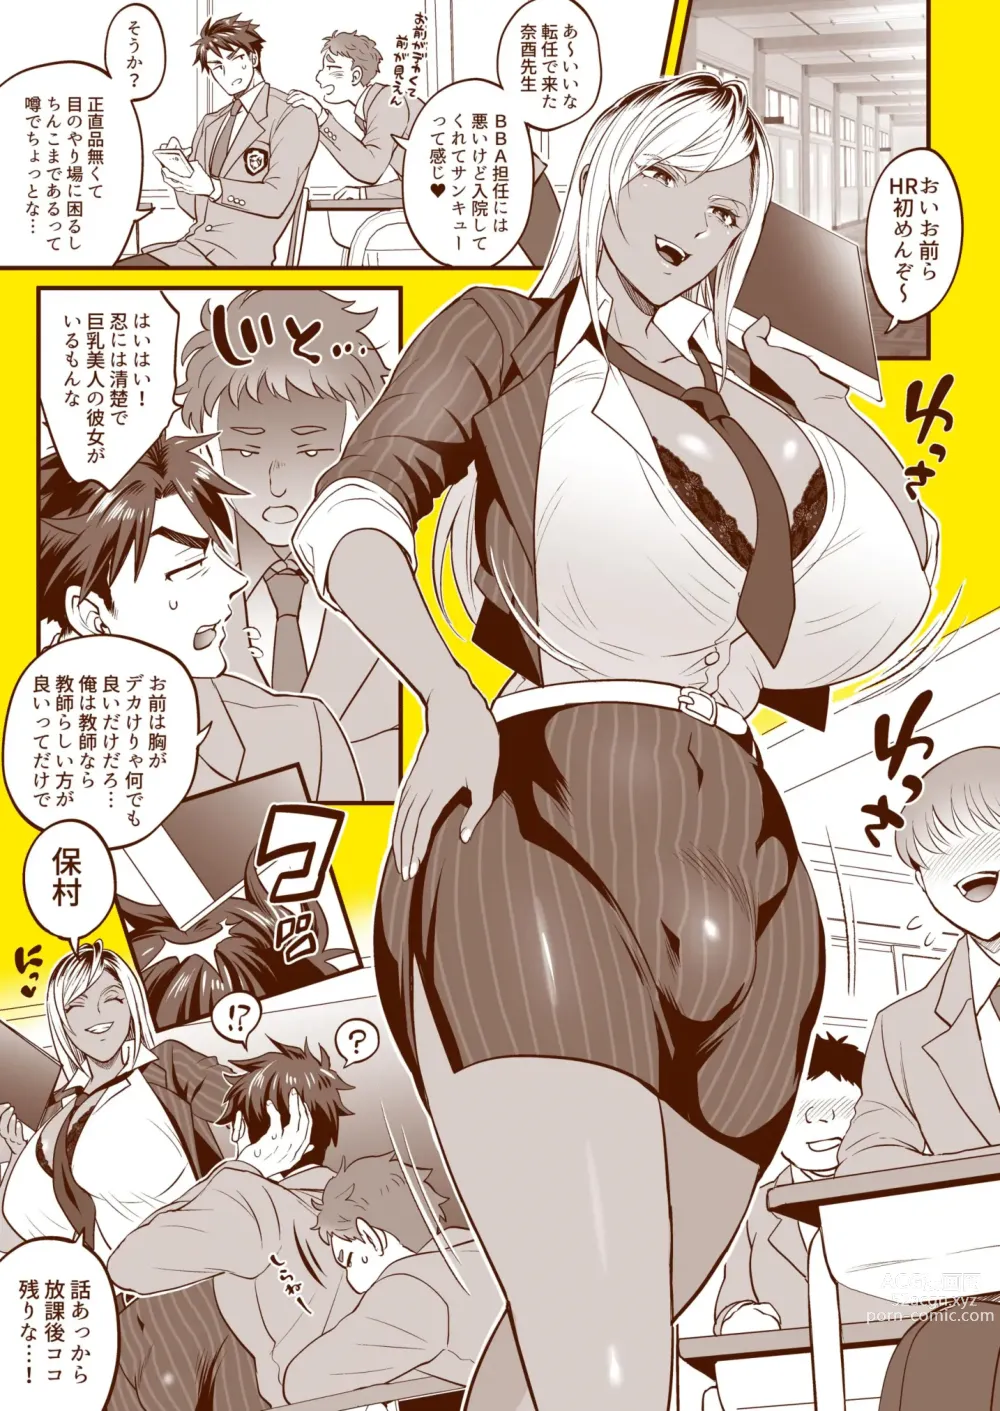 Page 5 of doujinshi Futanari Picture Collection